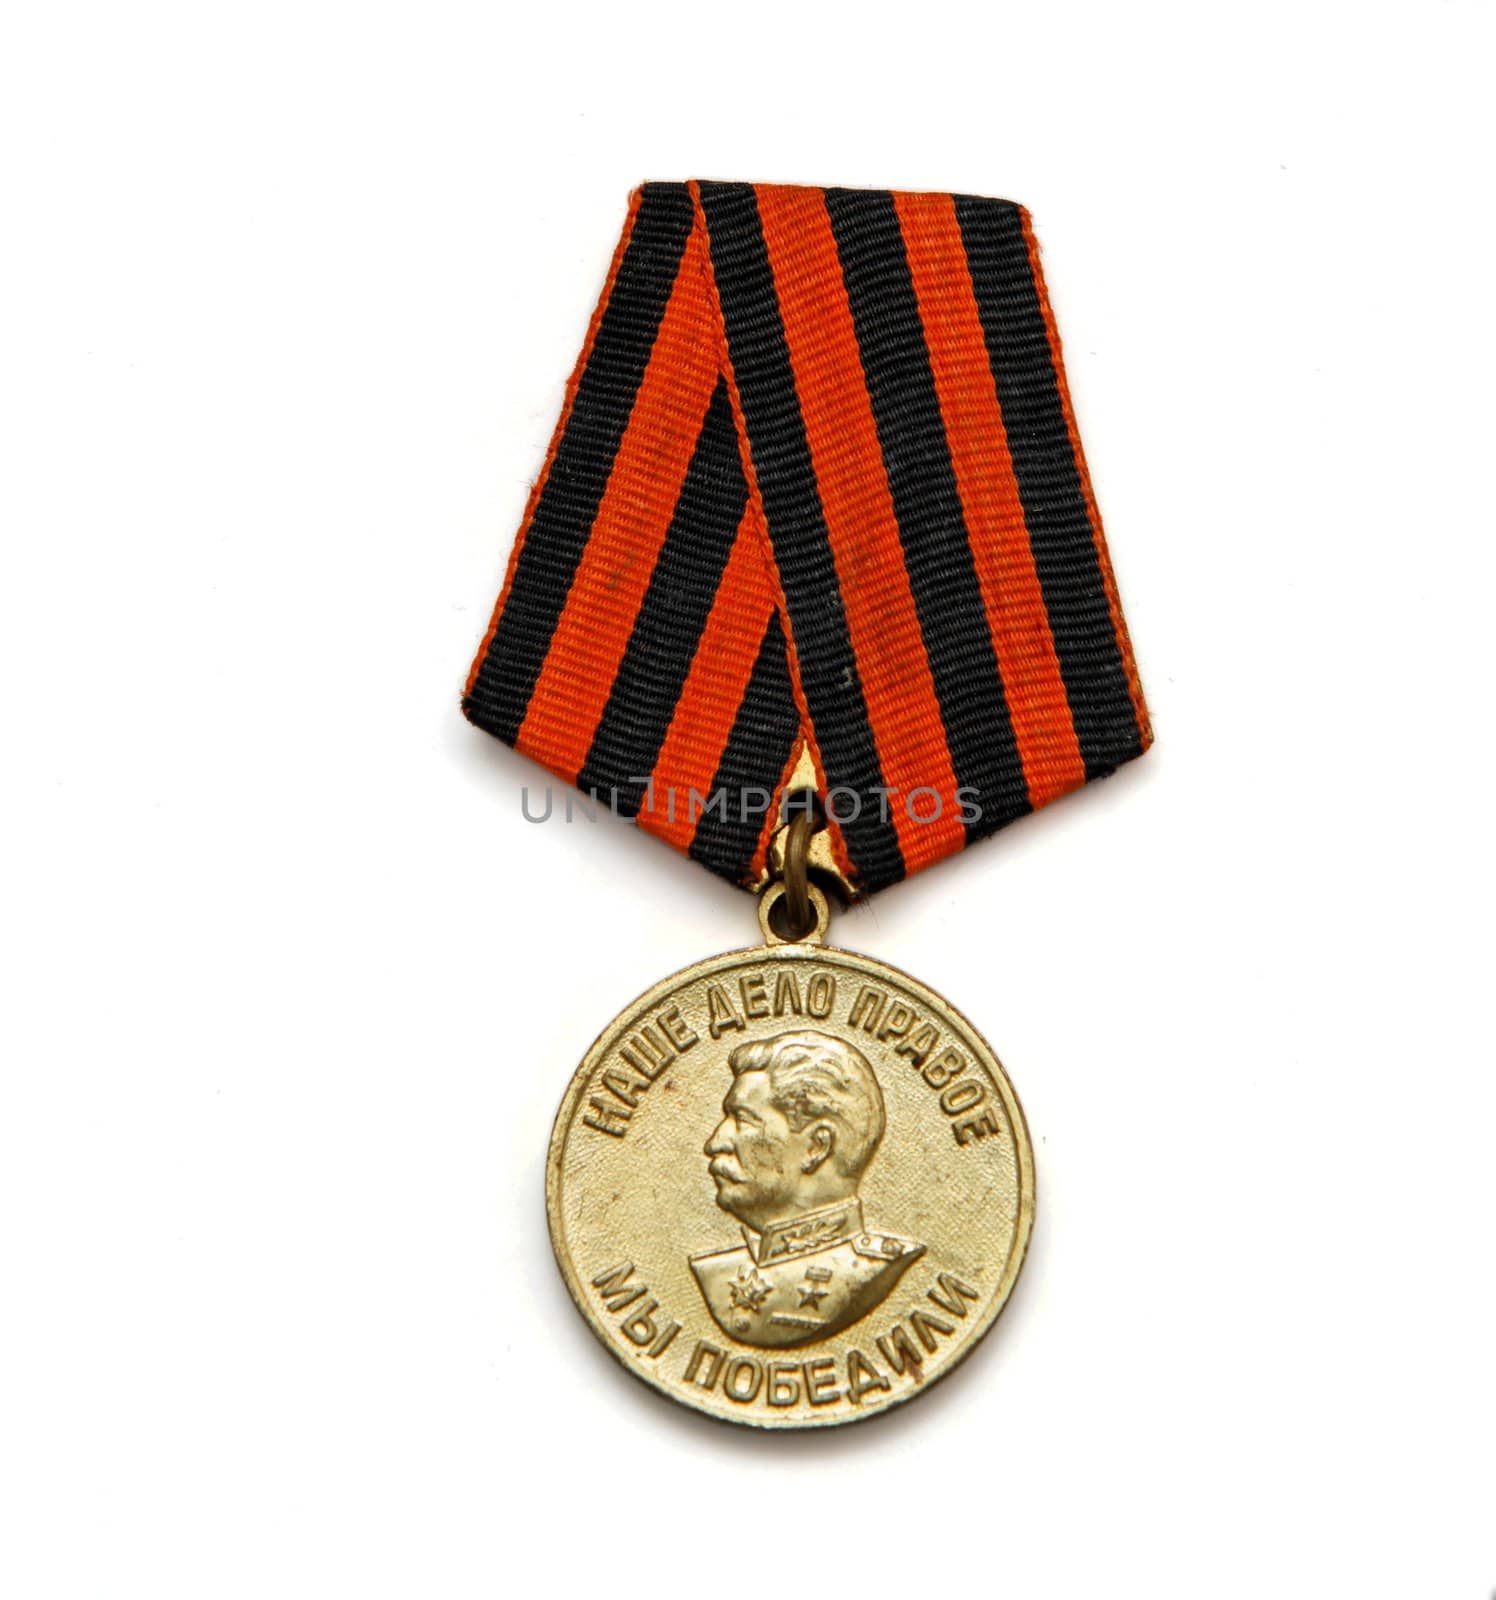 Old Soviet Medal for the Victory over Germany on white background